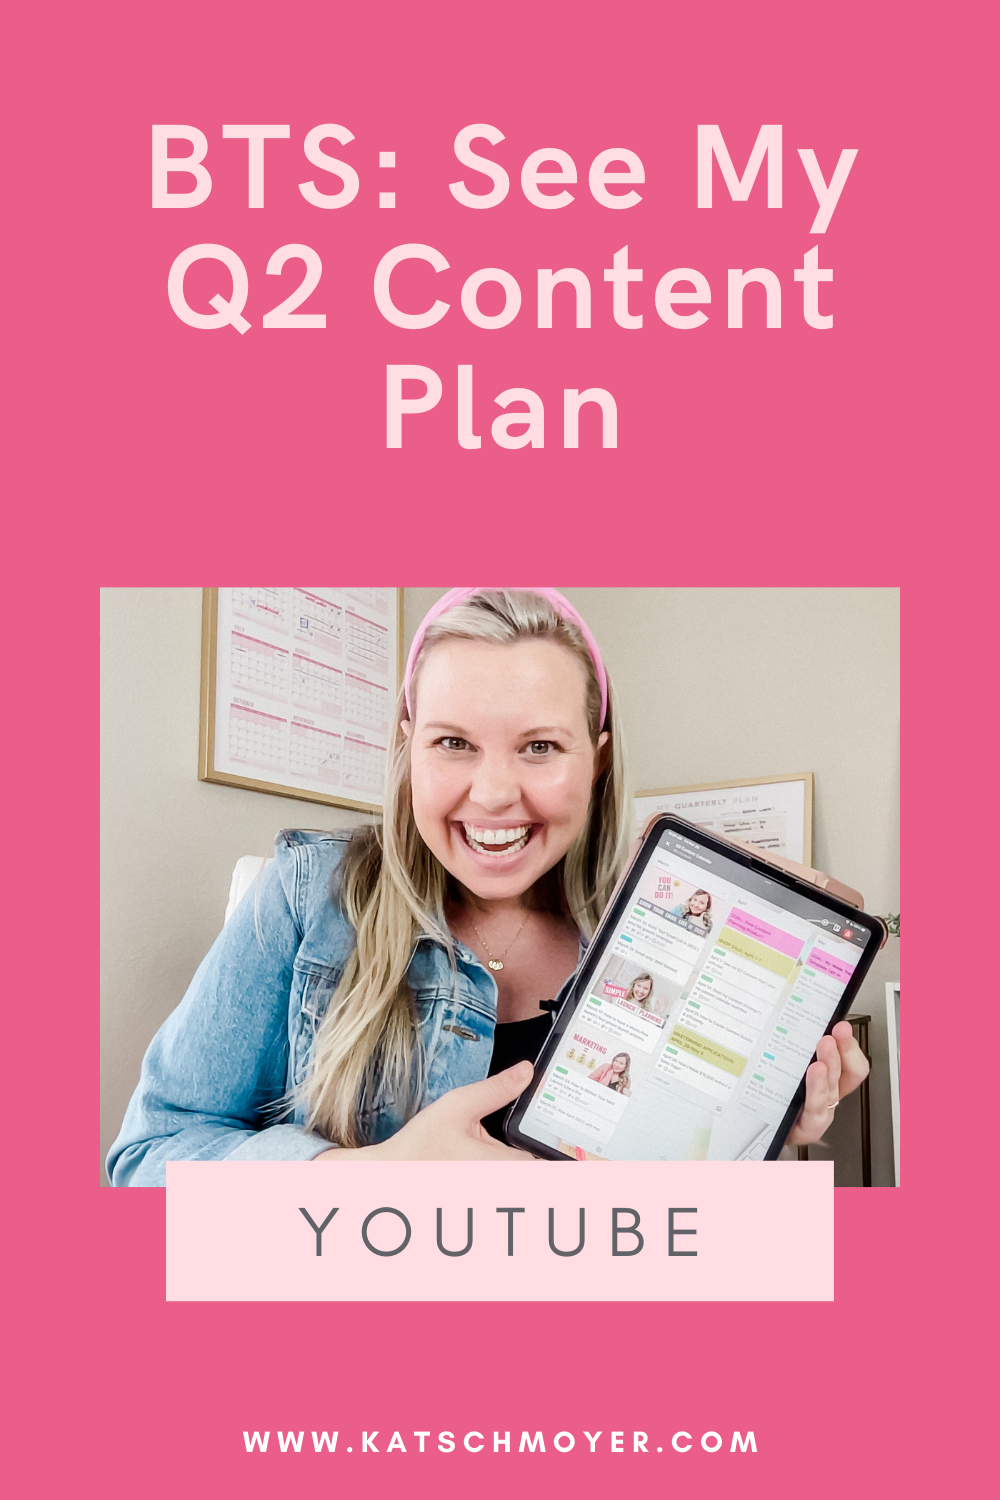 BTS: See my Q2 Content Plan